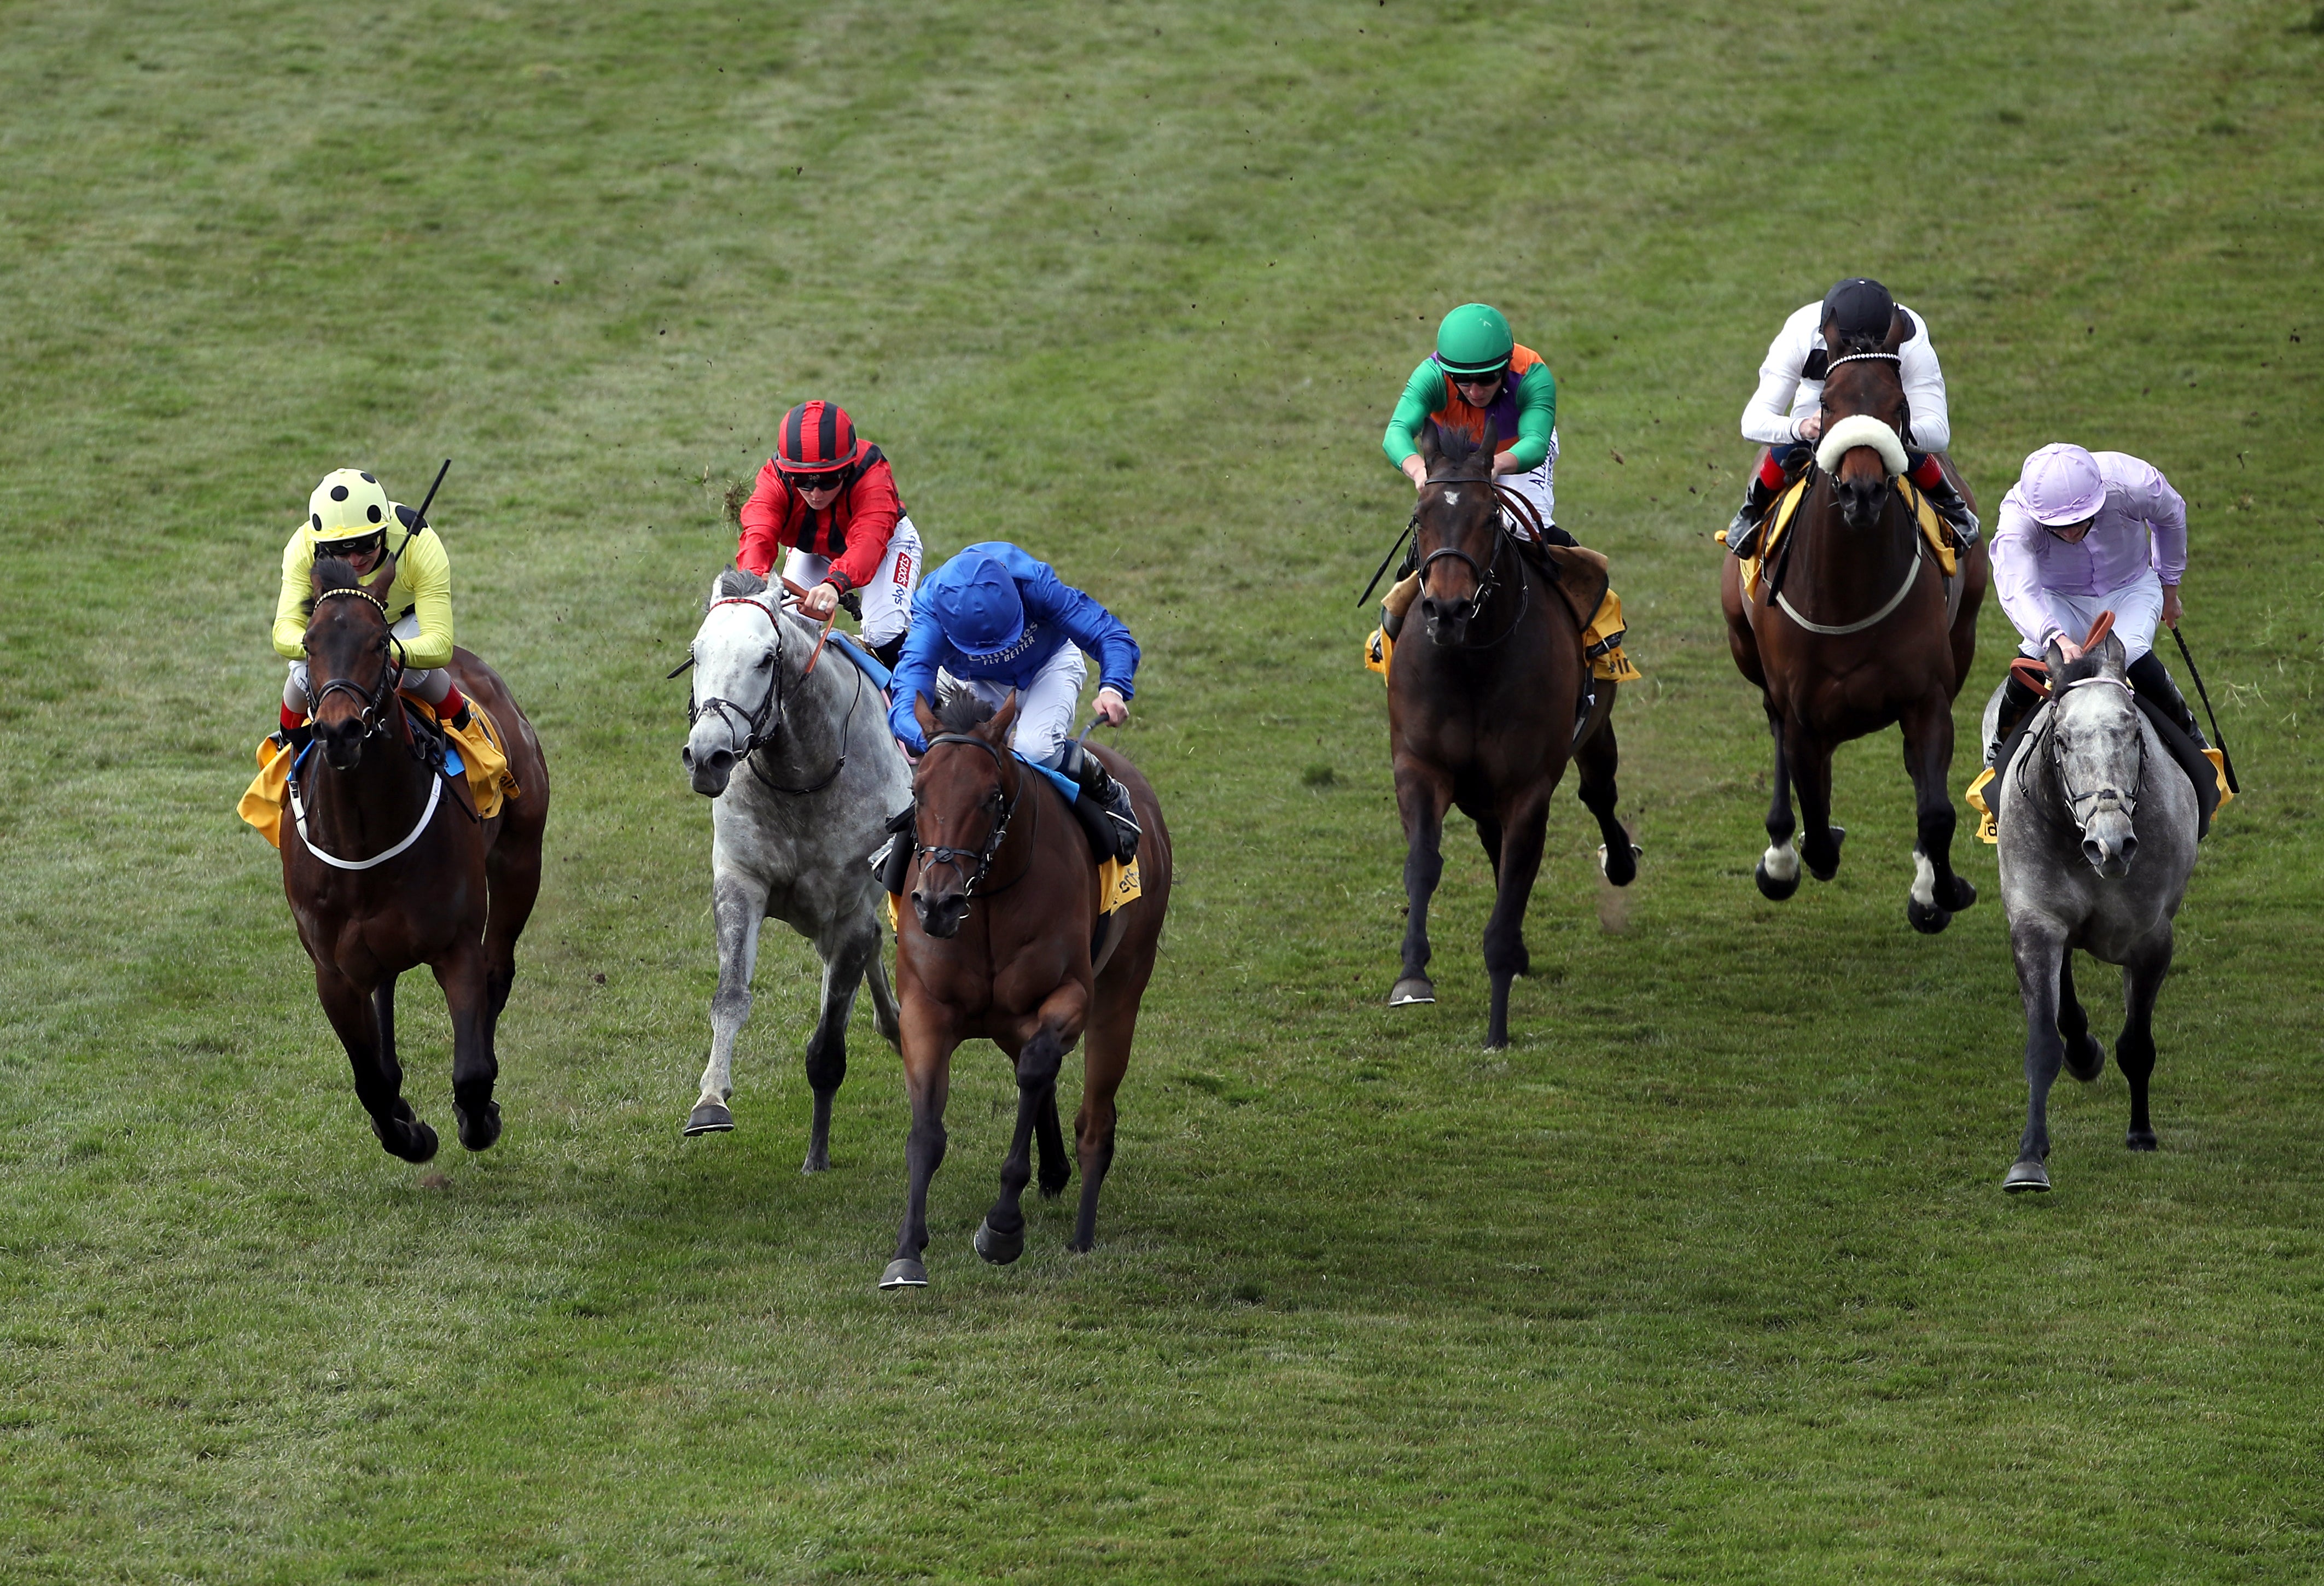 Lazuli and William Buick leading en route to victory in the Betfair Palace House Stakes at Newmarke